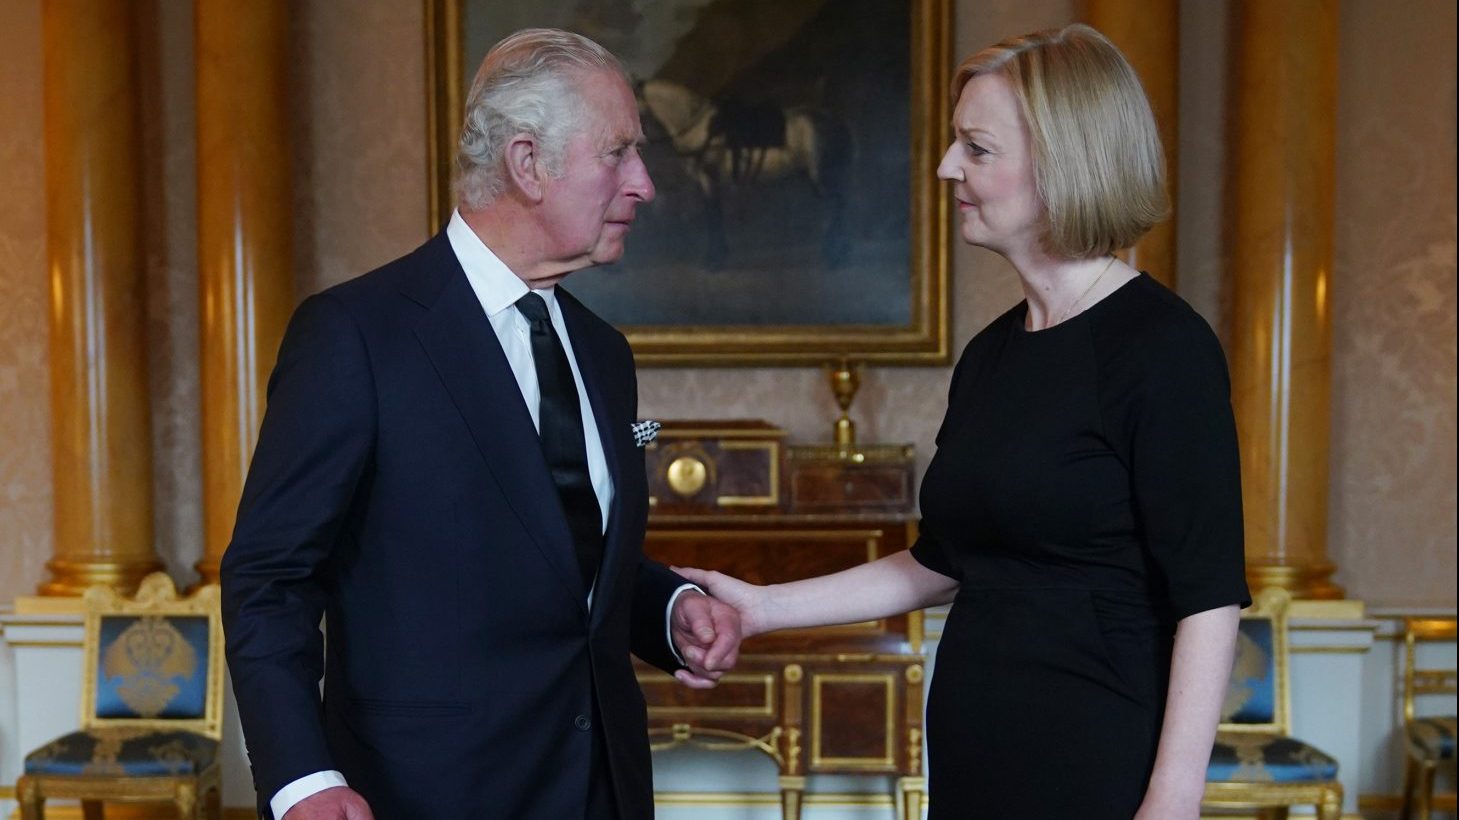 King Charles III during his first audience with Prime Minister Liz Truss at Buckingham Palace. Photo:  Yui Mok/PA Wire/PA Images